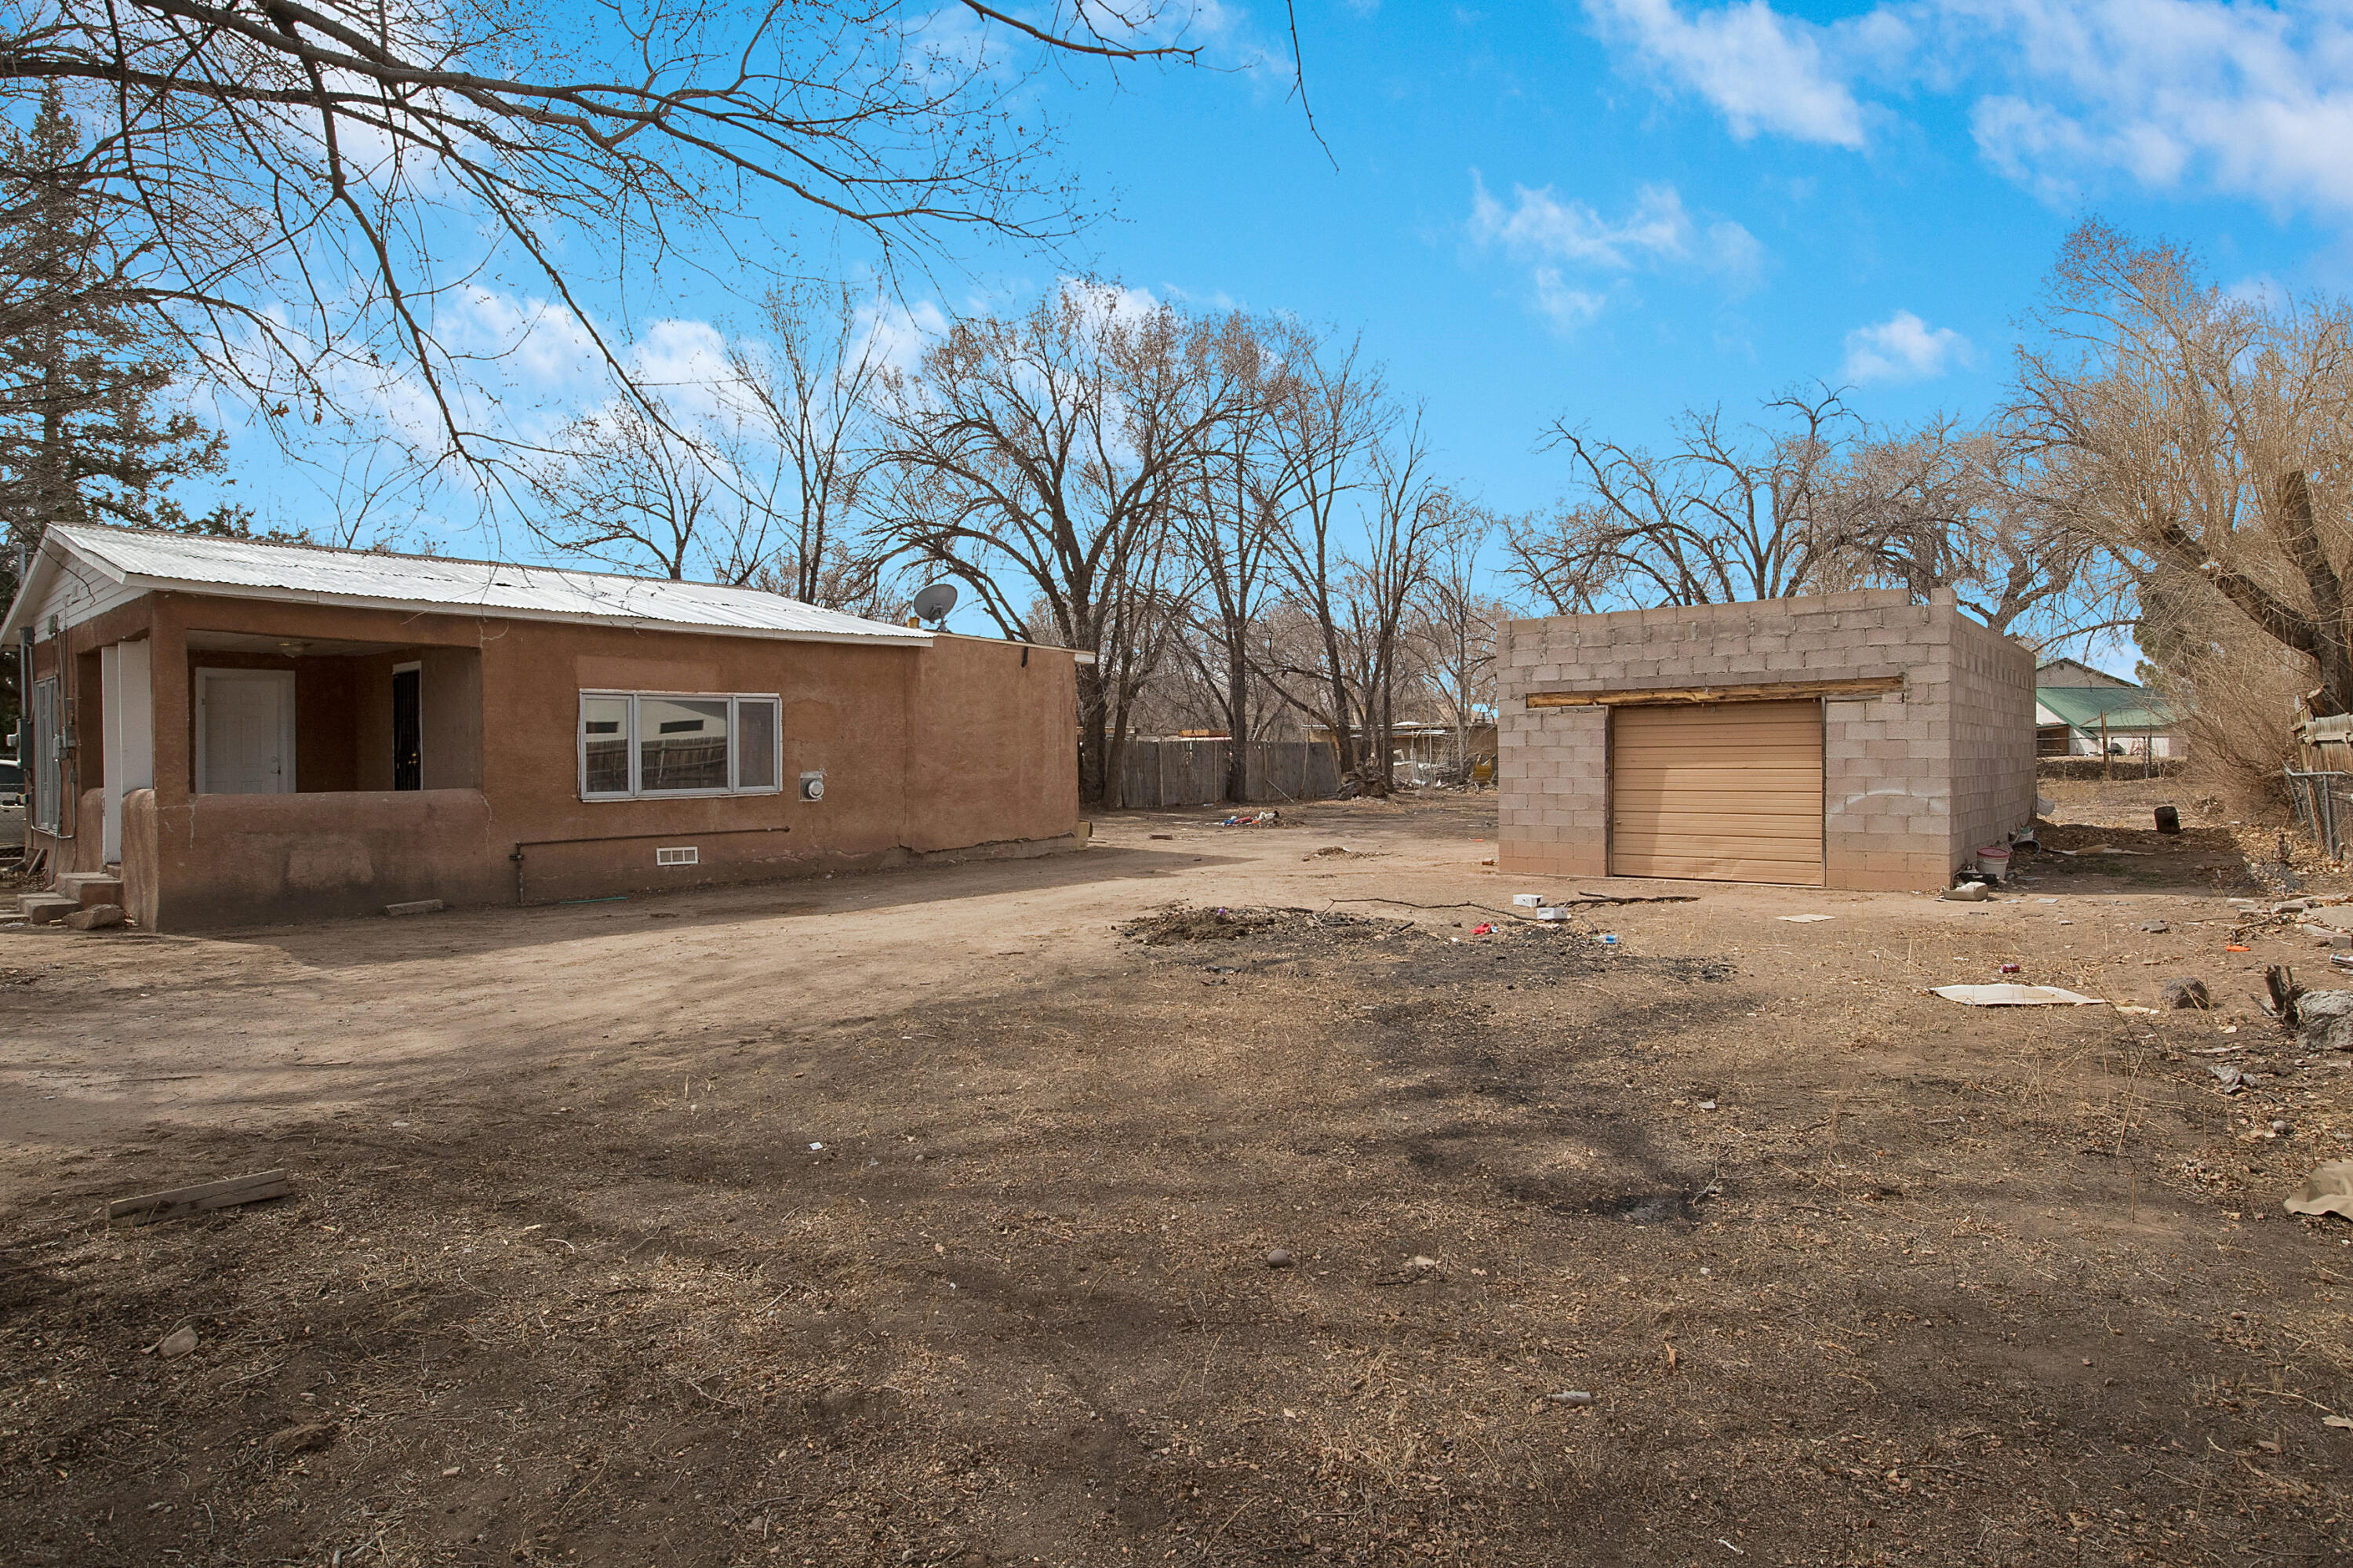 Buyers financing fell through so now you get to reap the benefit and have an opportunity at this cute home that appraised at $155K! Looking for a blank canvas? Tons of opportunity with this home! Situated on a large lot .34 acres for plenty of space for all your toys or to add on to this home! Schedule a showing now!